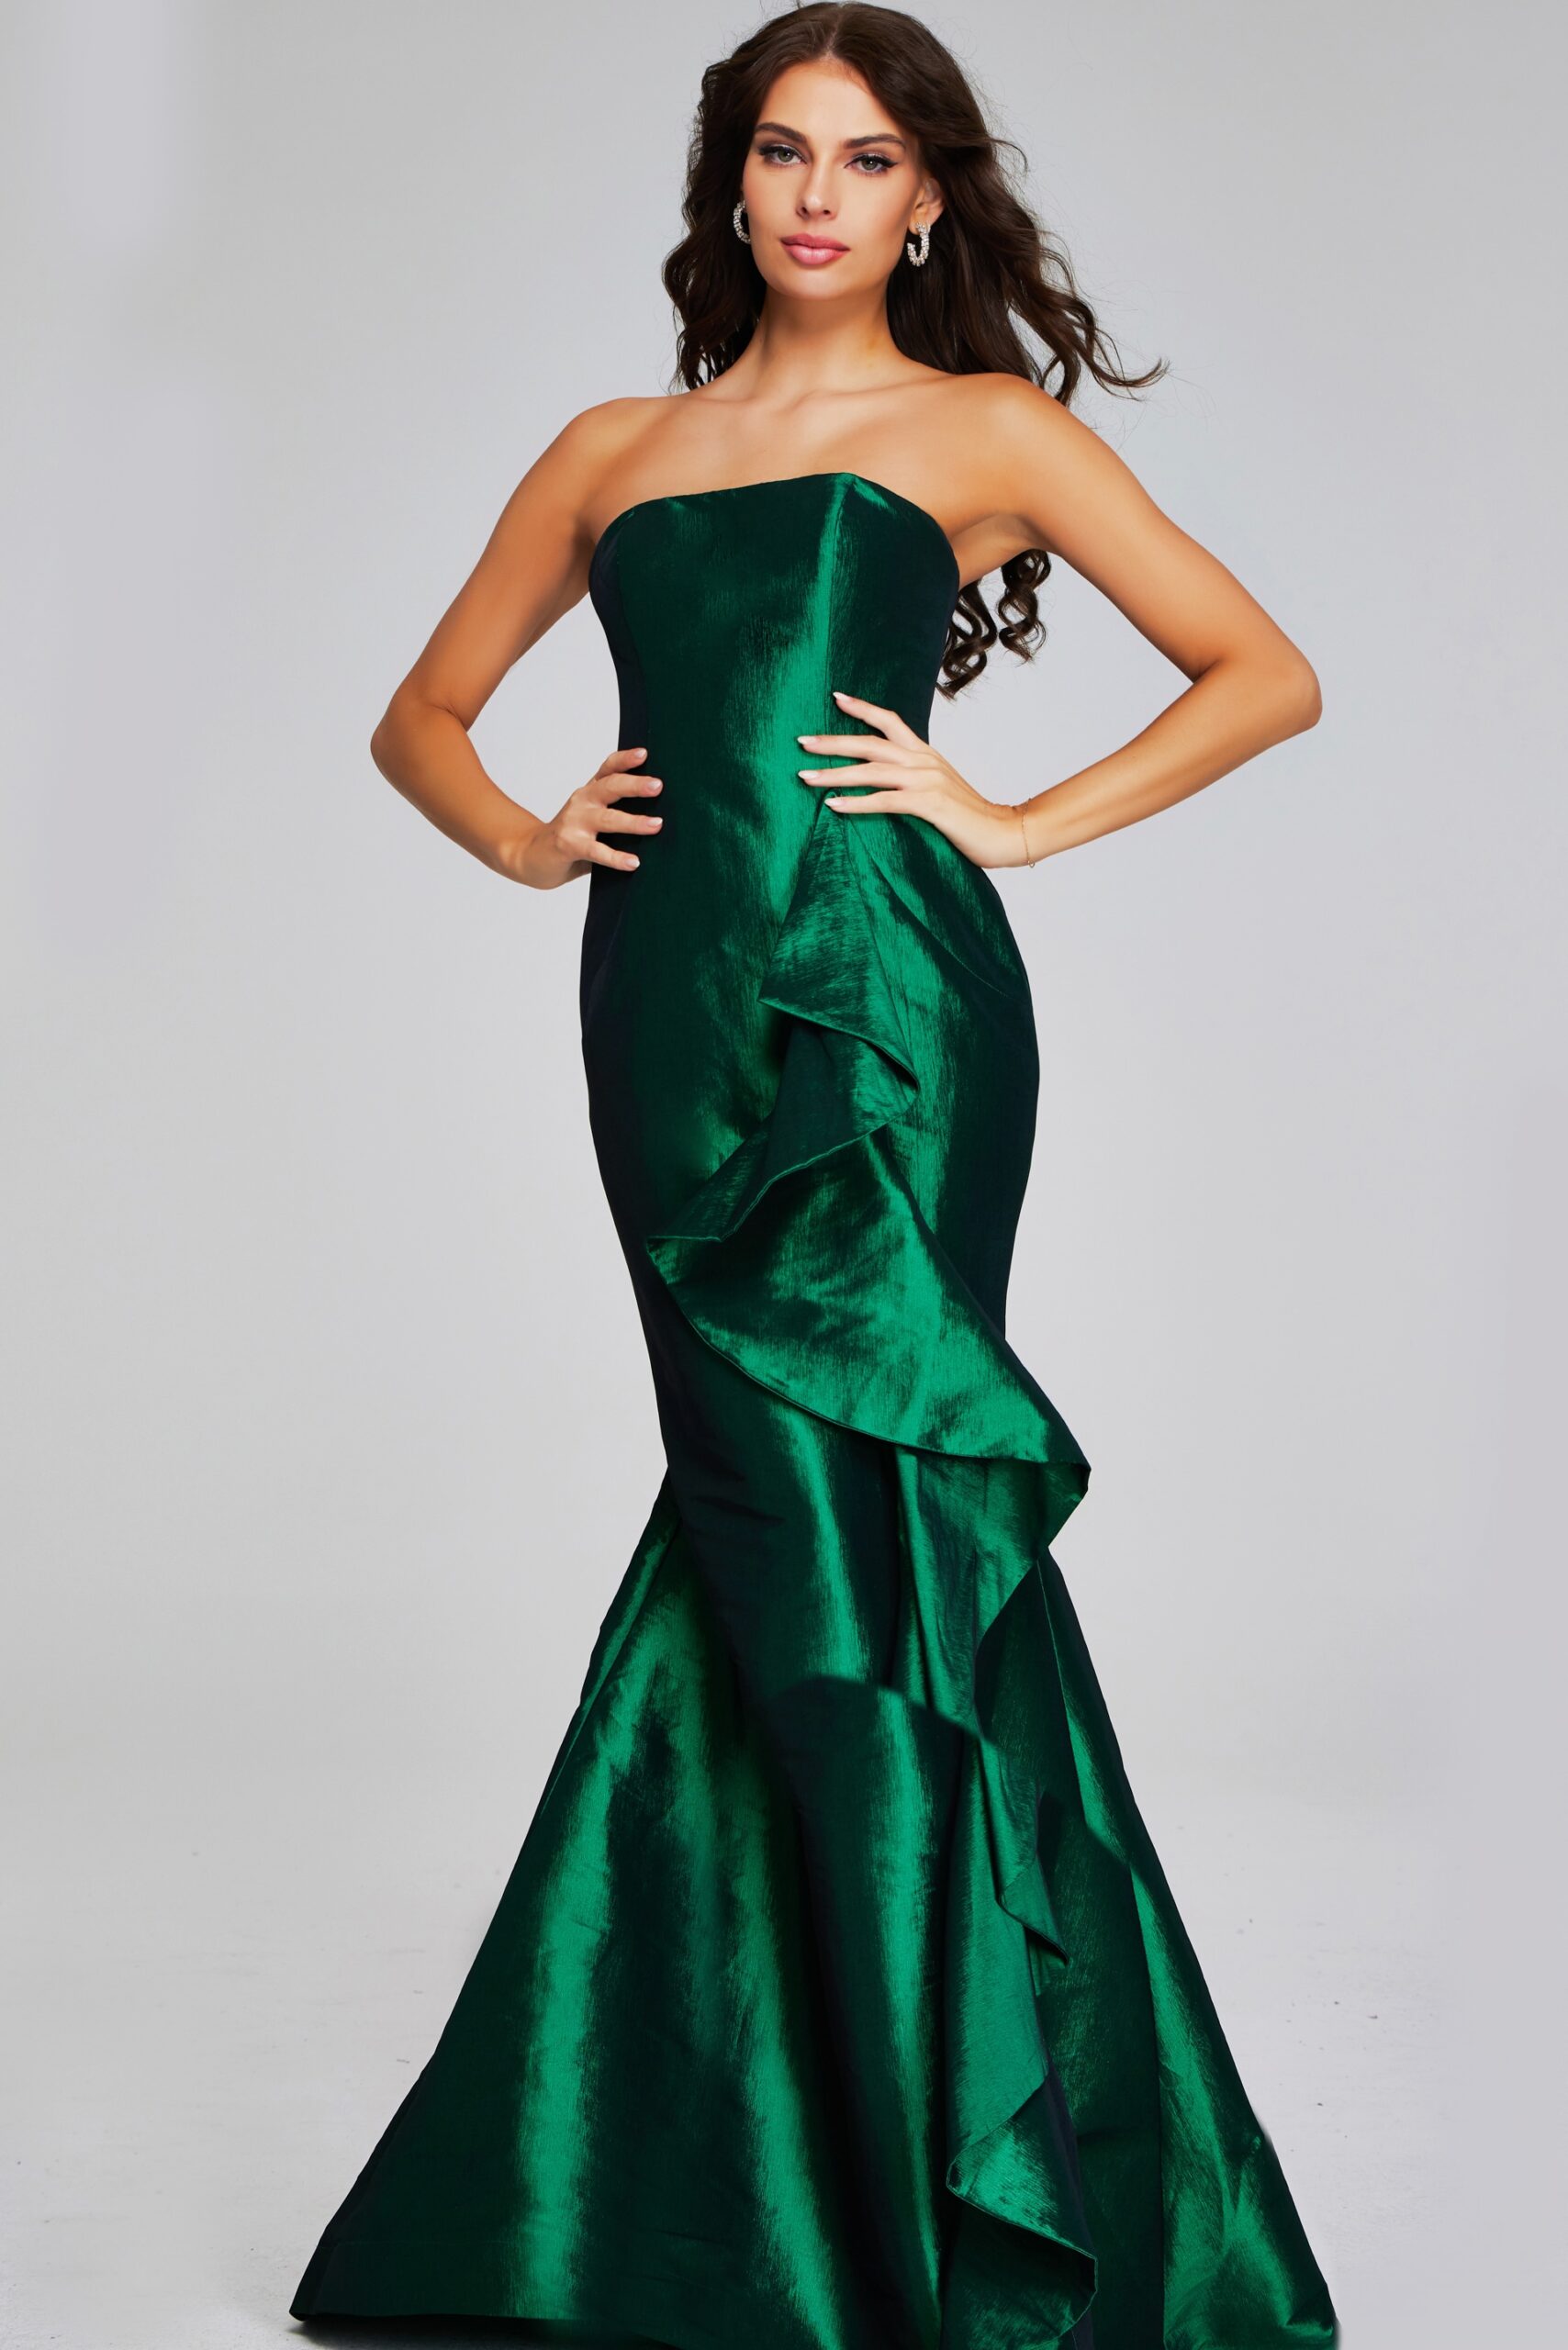 Model wearing Emerald Green Strapless Evening Gown 39368